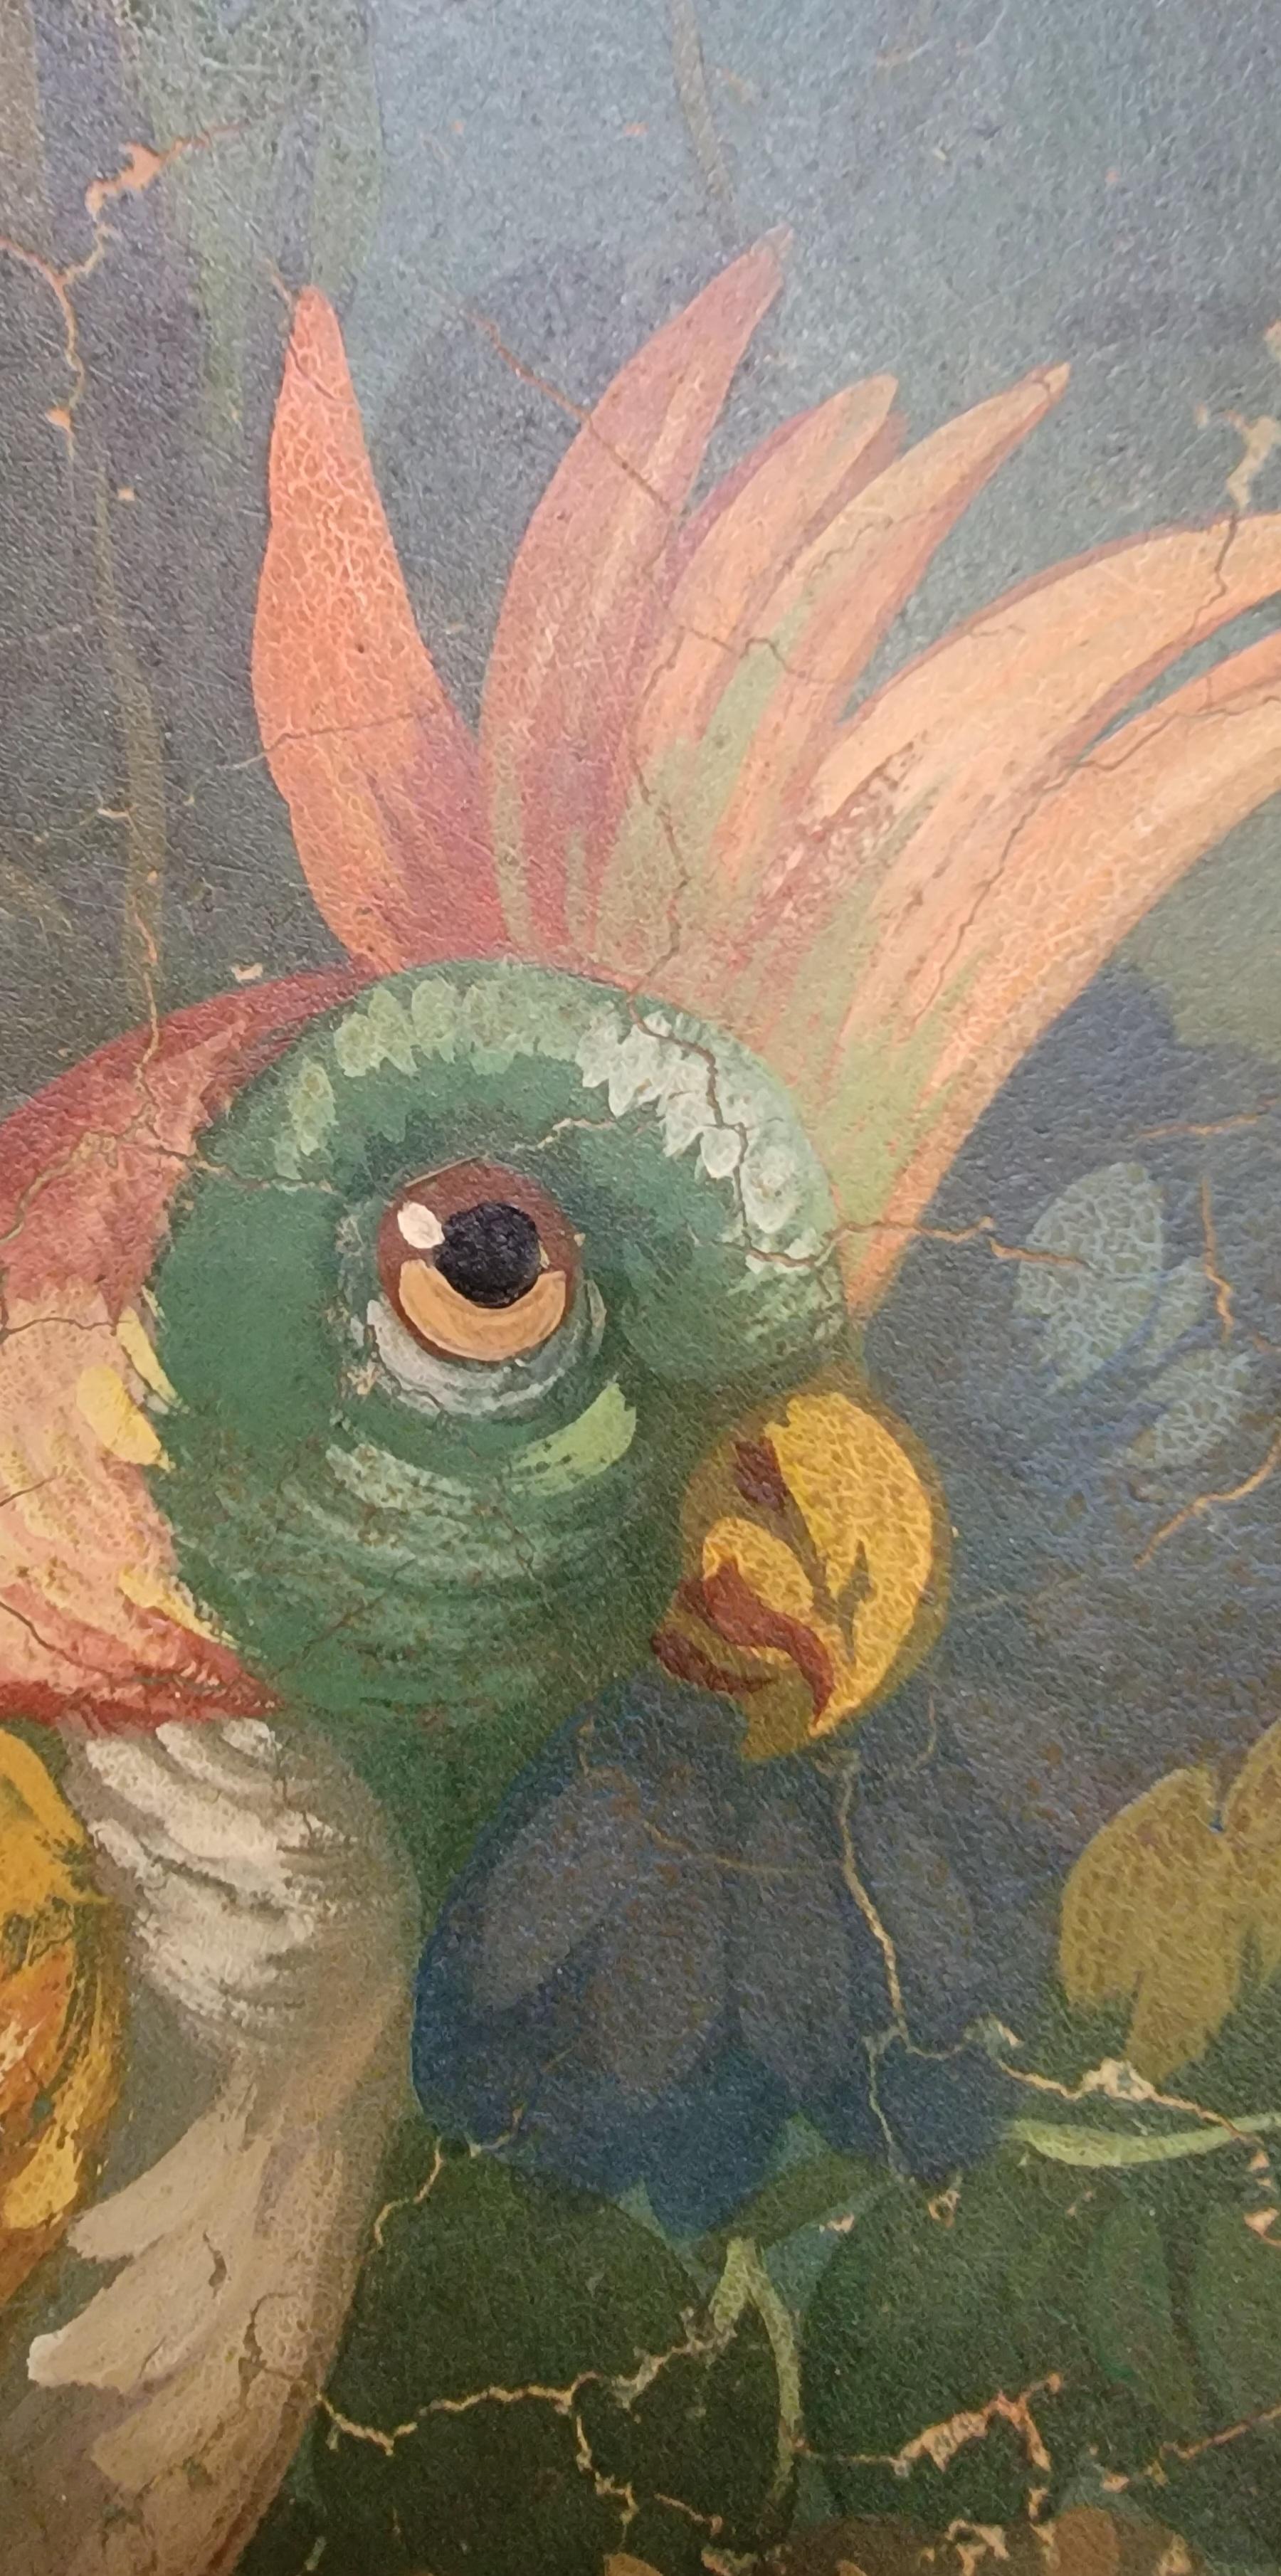 Floral & Parrot Wall Panels / Paintings 1920's In Fair Condition For Sale In Fulton, CA